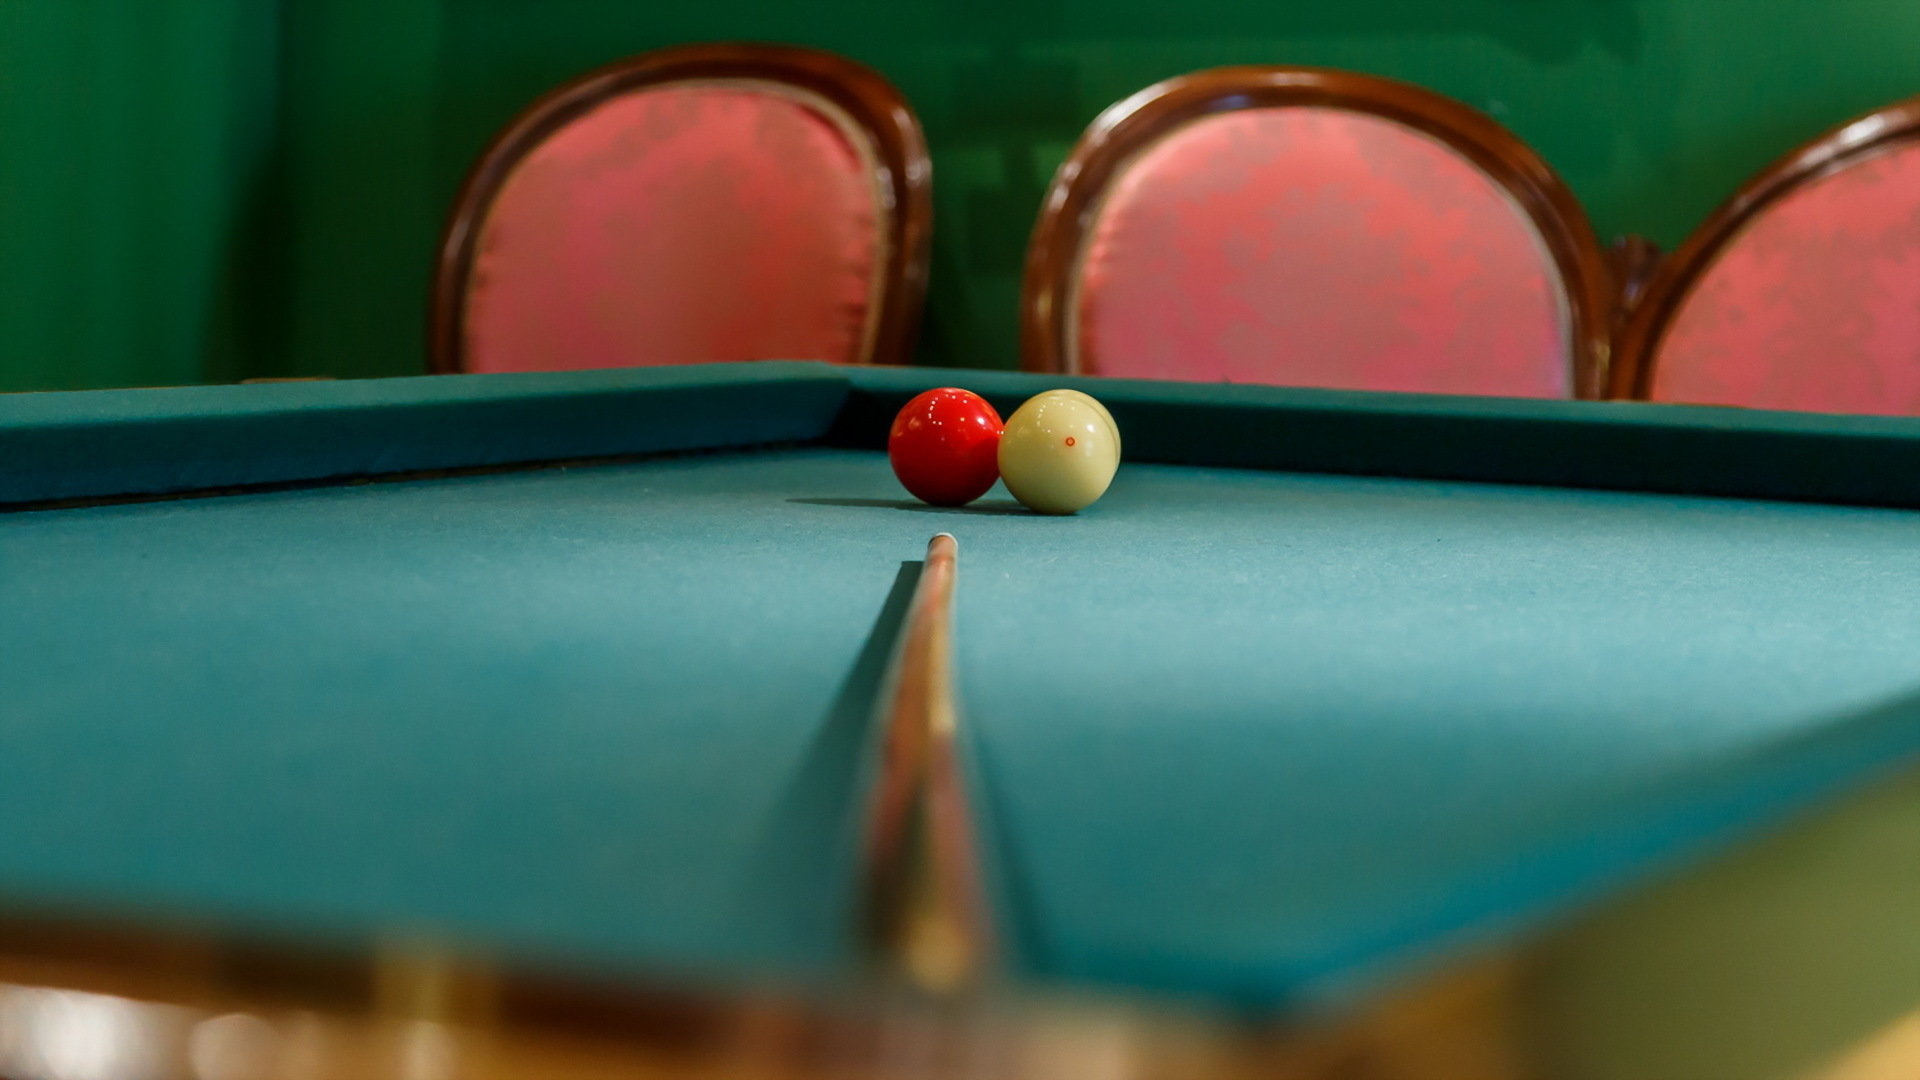 Billiards: Carom, The type of cue sport played on a smaller table without any drop pockets. 1920x1080 Full HD Background.